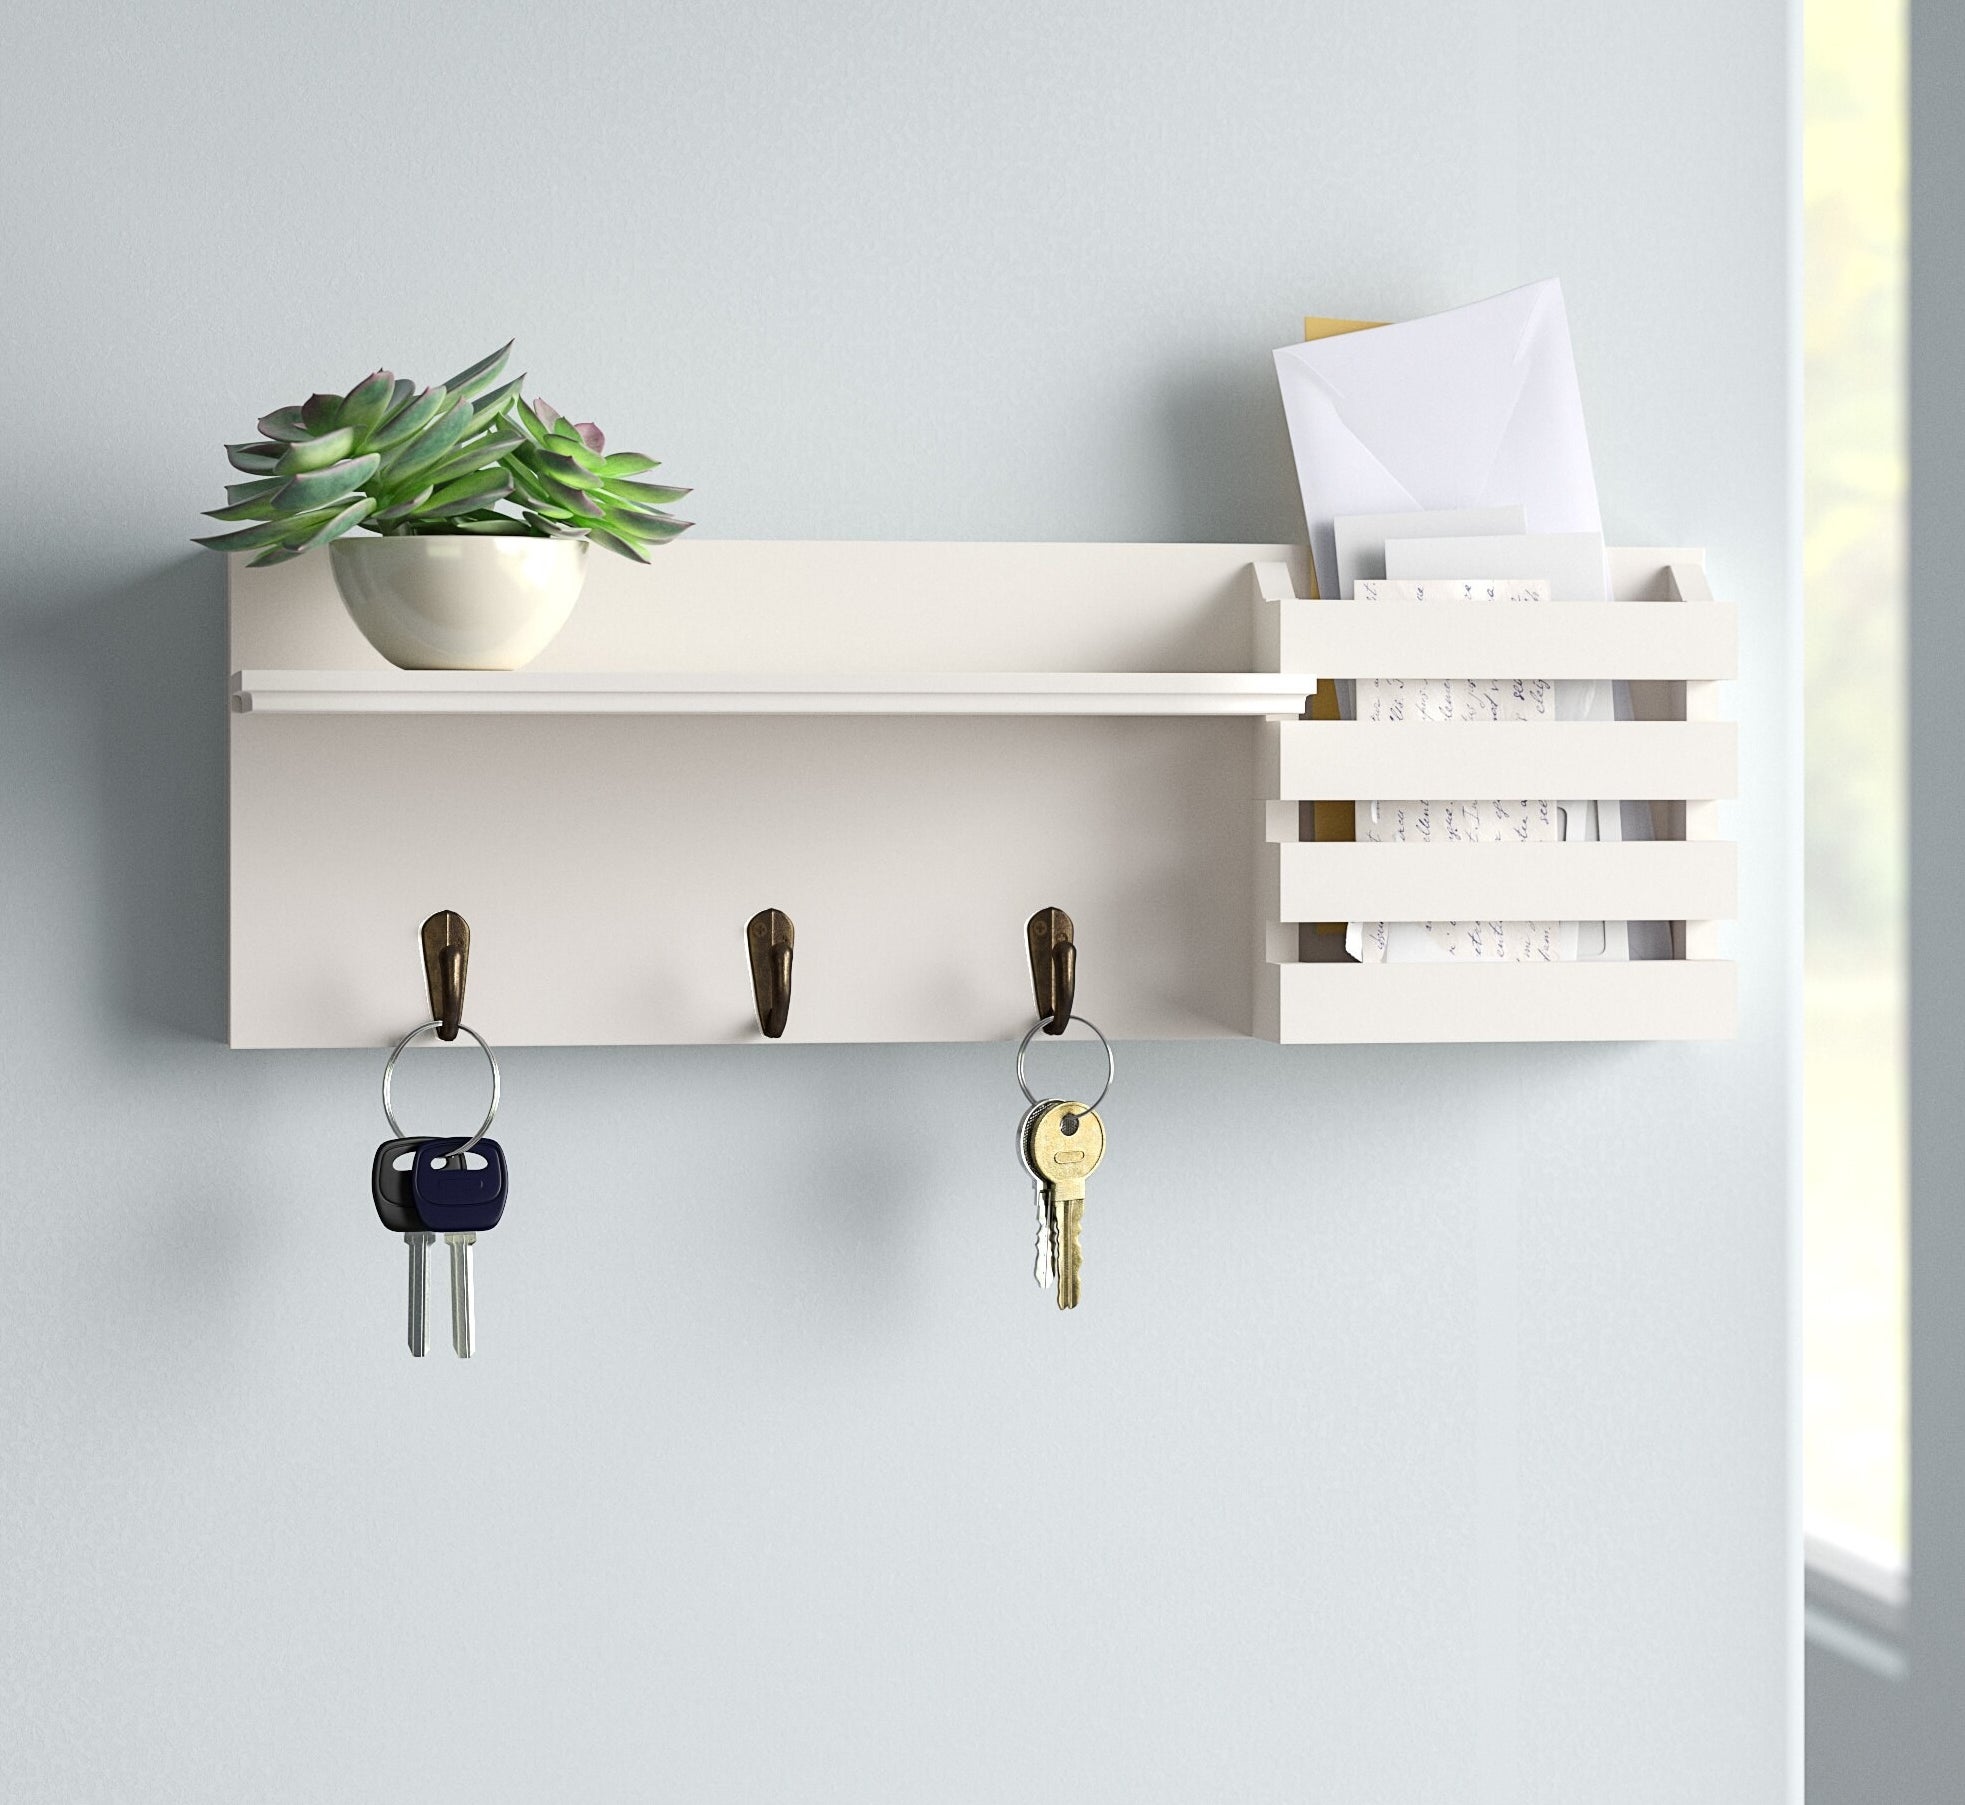 The white shelf on a wall holding keys, a succulent, and mail